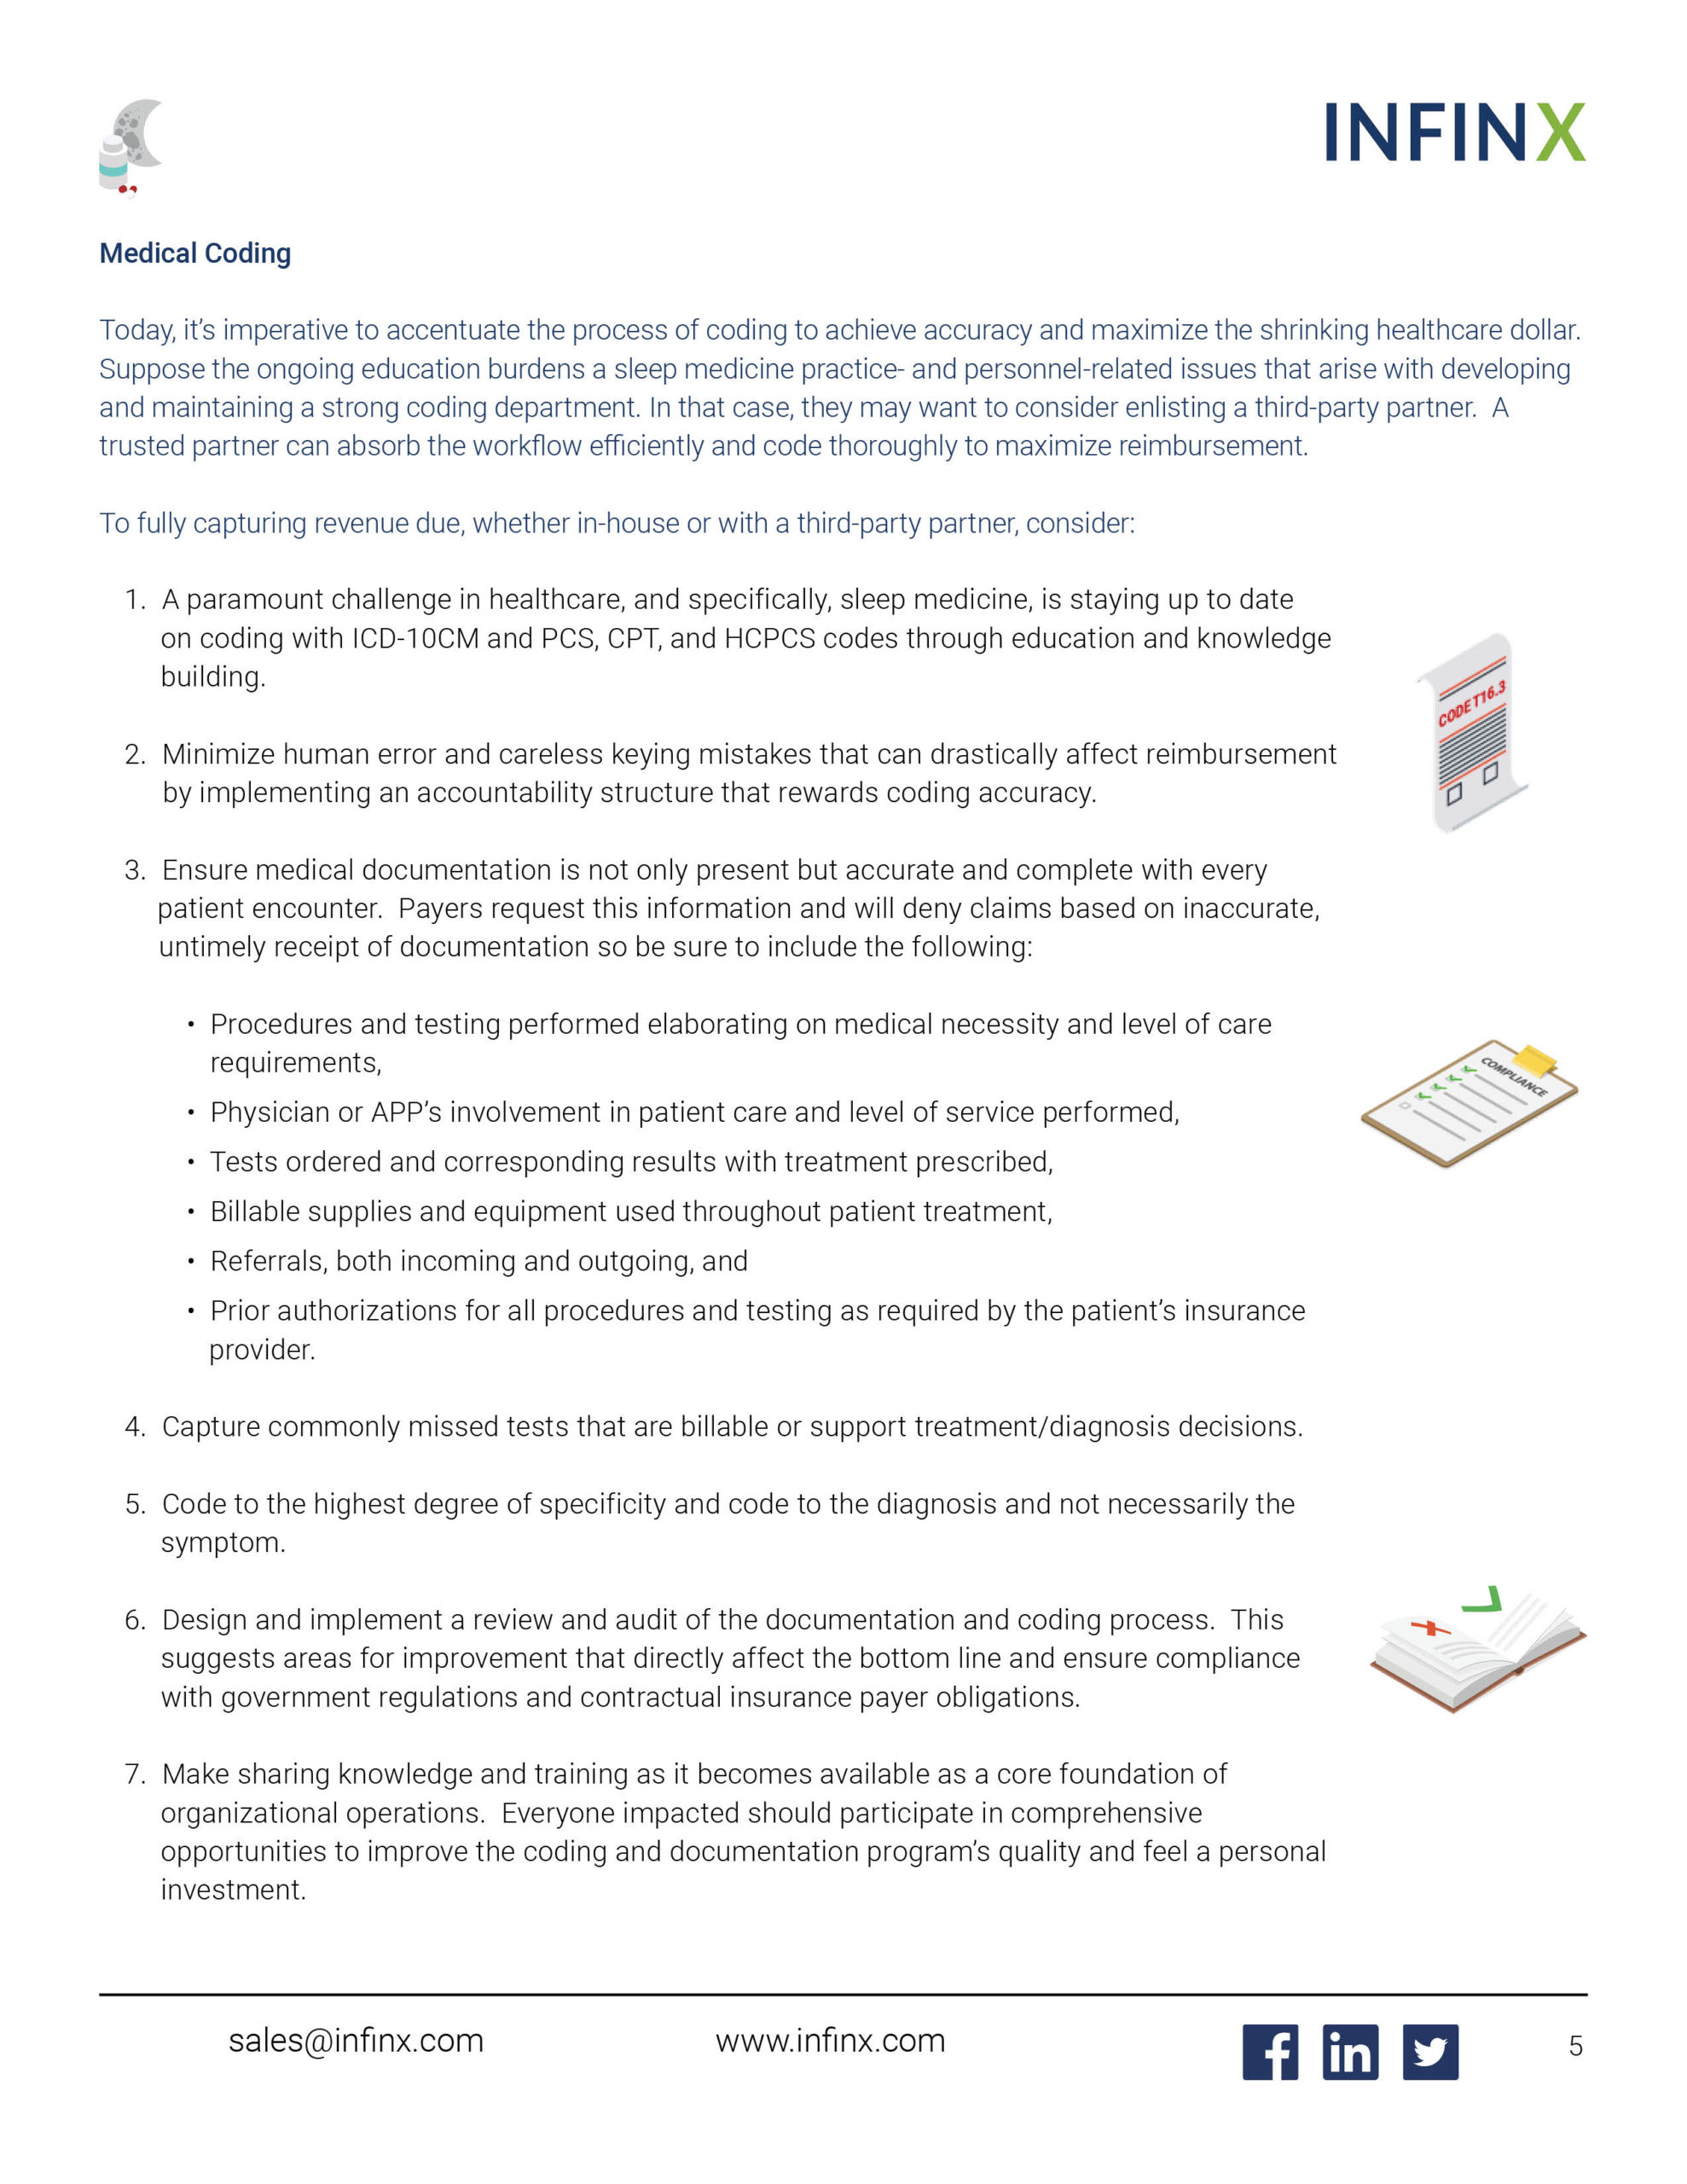 Infinx - White Paper - Innovative Solutions for the RCM Lifecycle in Sleep Medicine - May2021 5